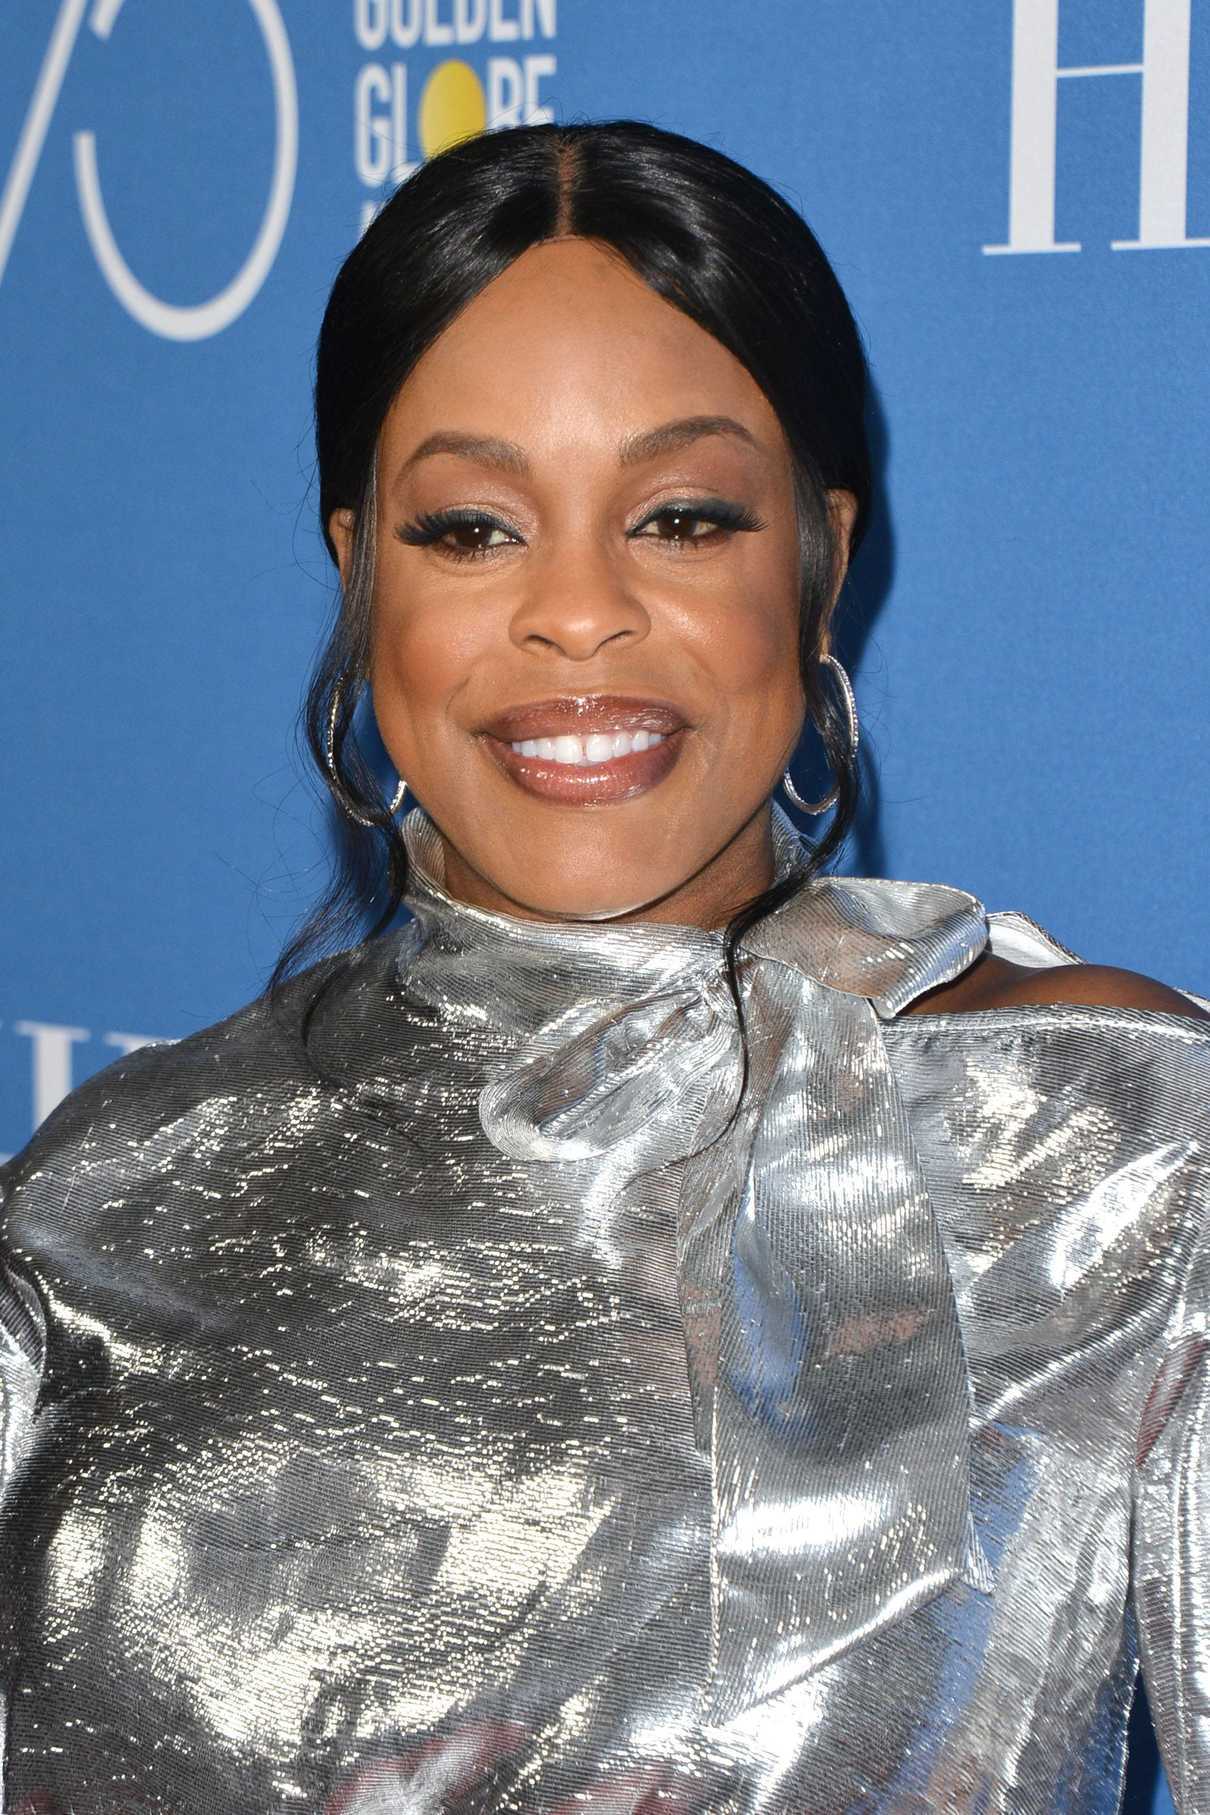 Niecy Nash at the Golden Globes 75th Anniversary Special Screening at